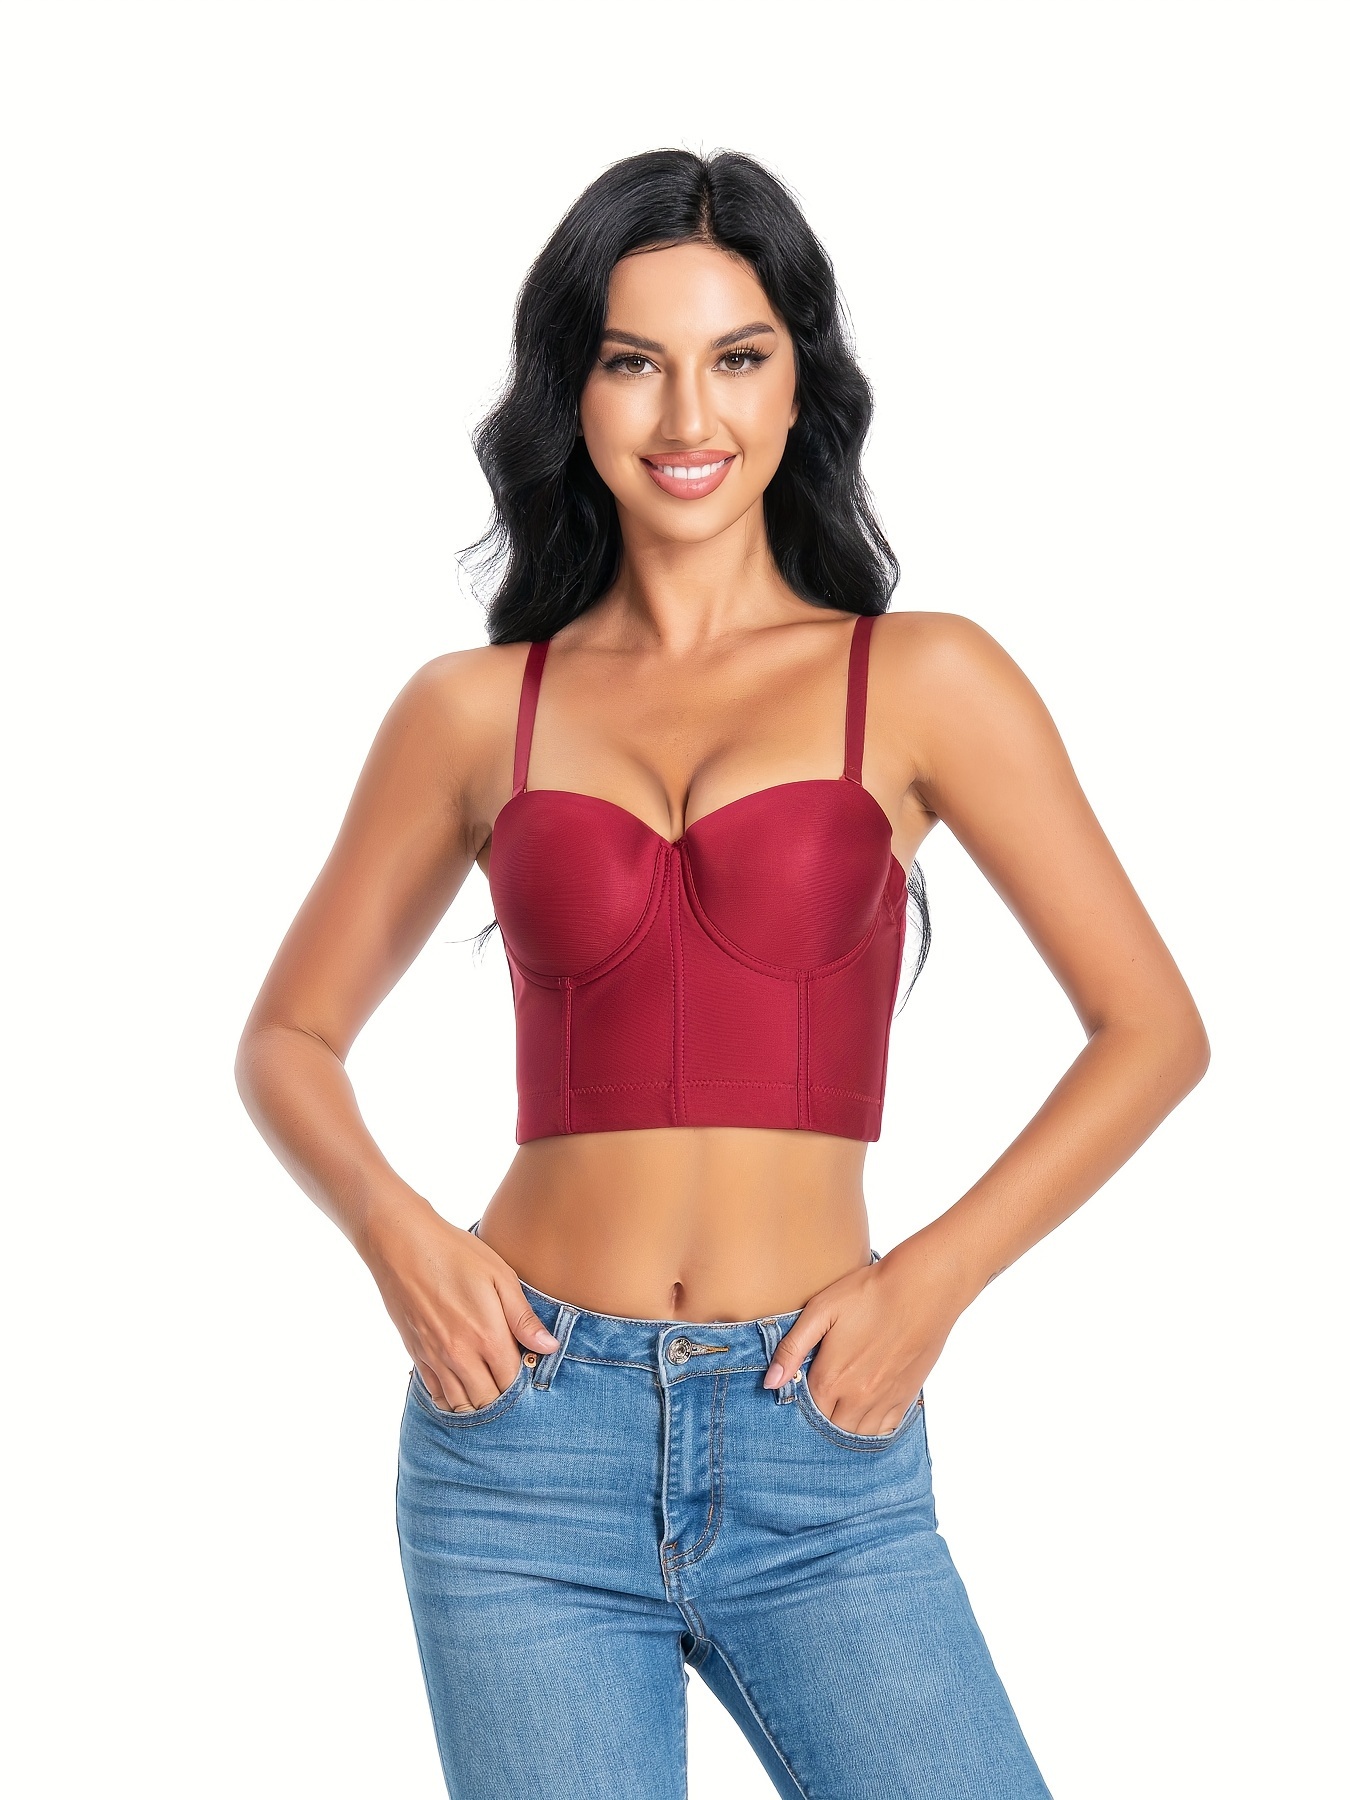 Adjustable Strap Cropped Corset Bra Top For Women Push Up Bra